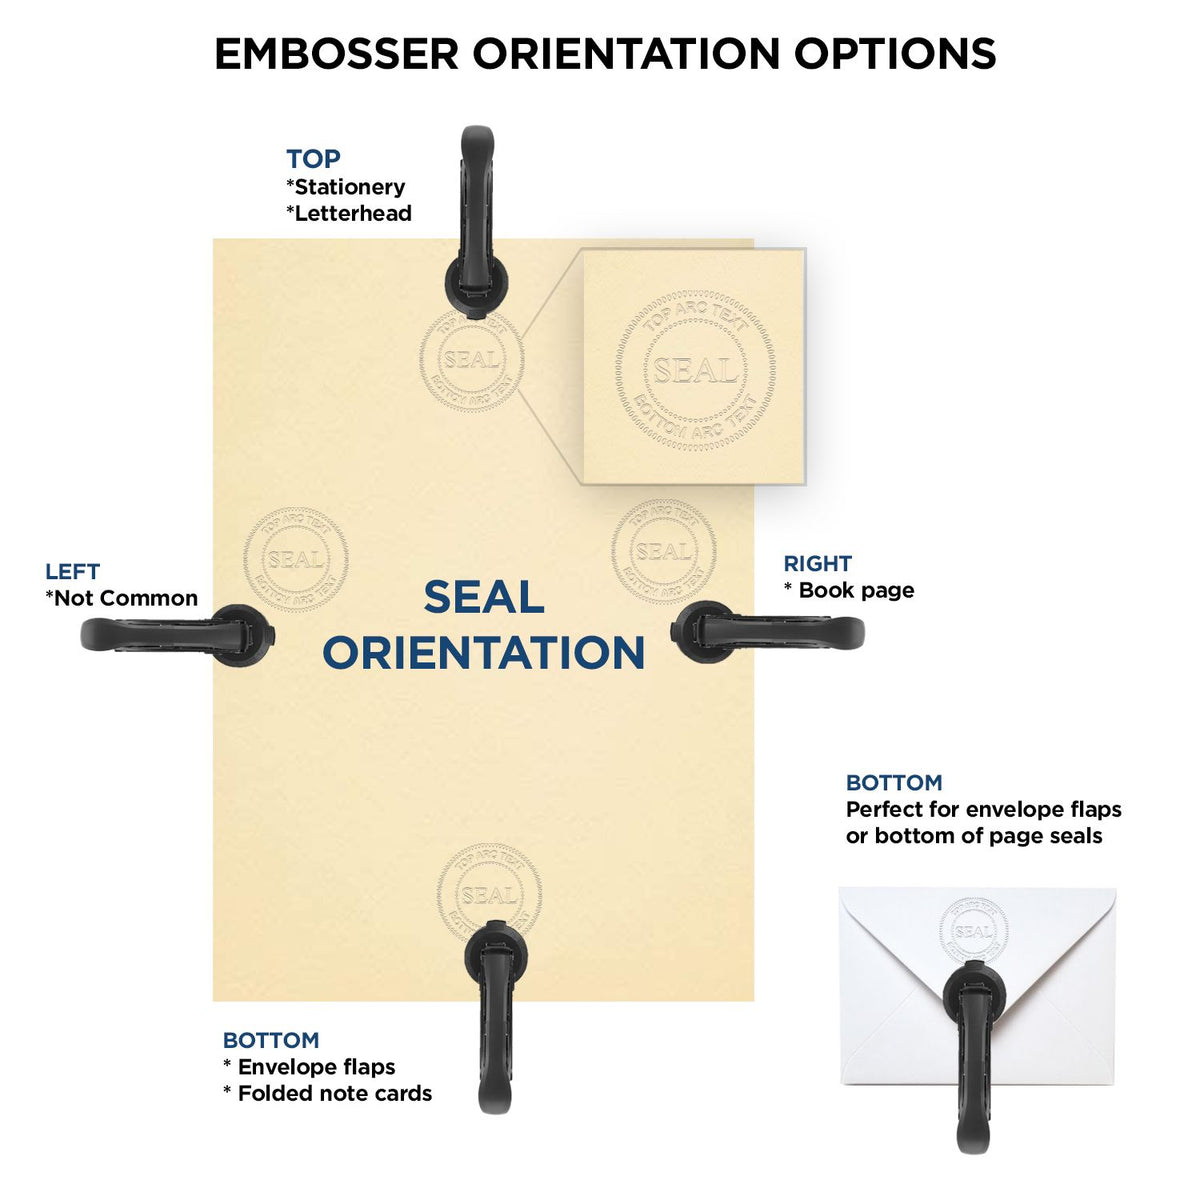 An infographic for the Hybrid New York Engineer Seal showing embosser orientation, this is showing examples of a top, bottom, right and left insert.